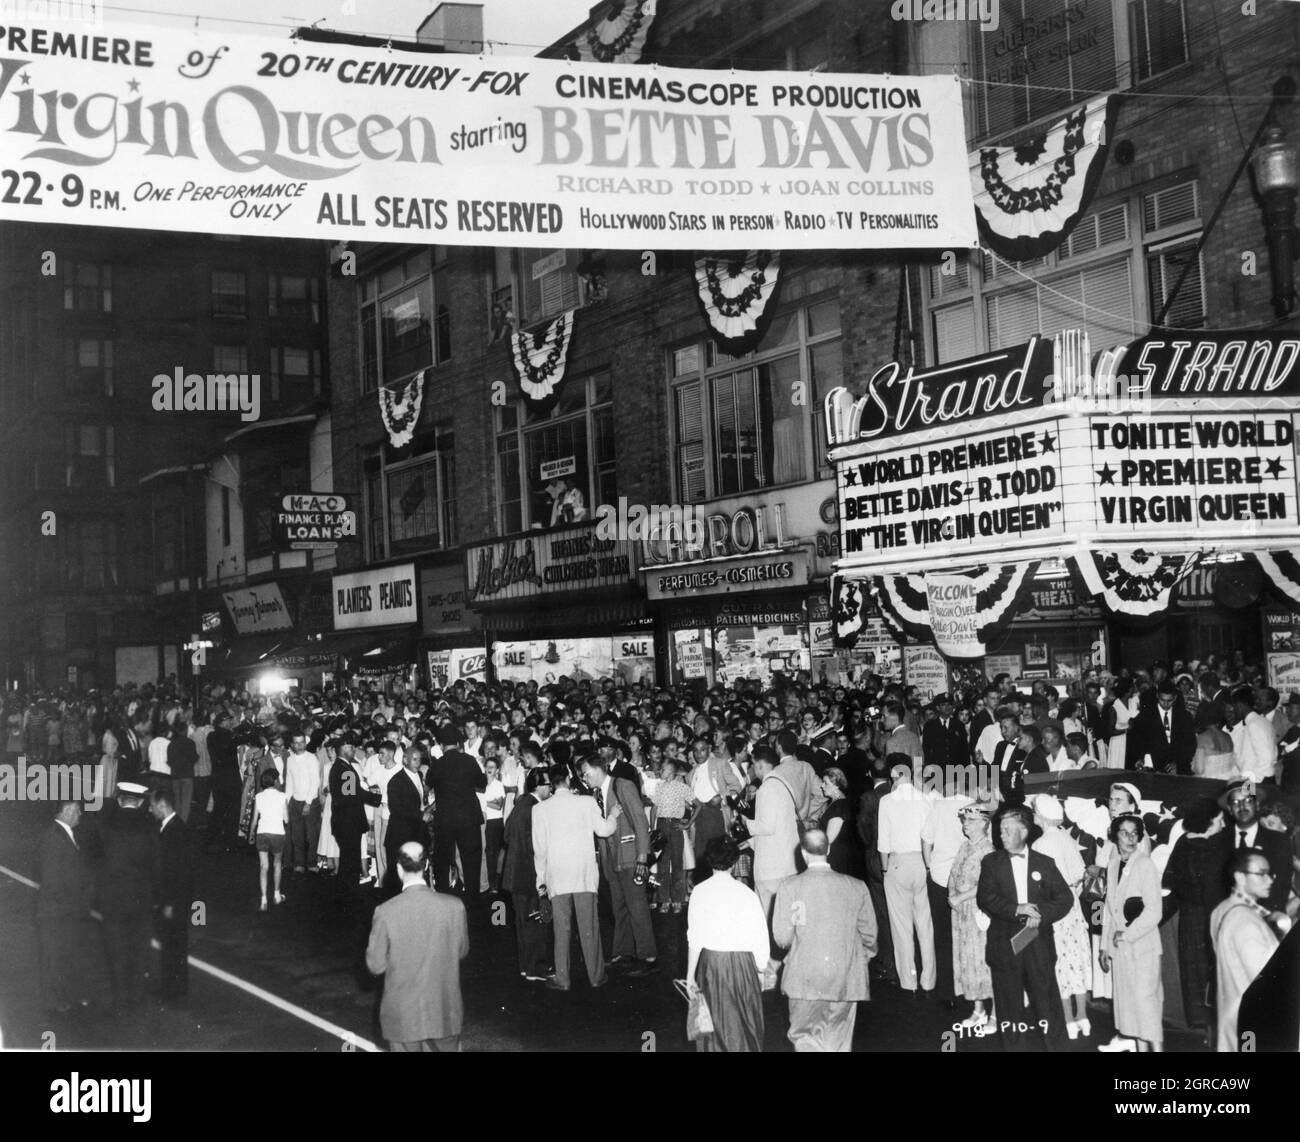 World premiere at the Strand Theatre New York in July 1955 of BETTE DAVIS as Elizabeth I of England and RICHARD TODD as Sir Walter Raleigh in THE VIRGIN QUEEN 1955 director HENRY KOSTER music Franz Waxman producer Charles Brackett costumes Mary Wills Twentieth Century Fox Stock Photo